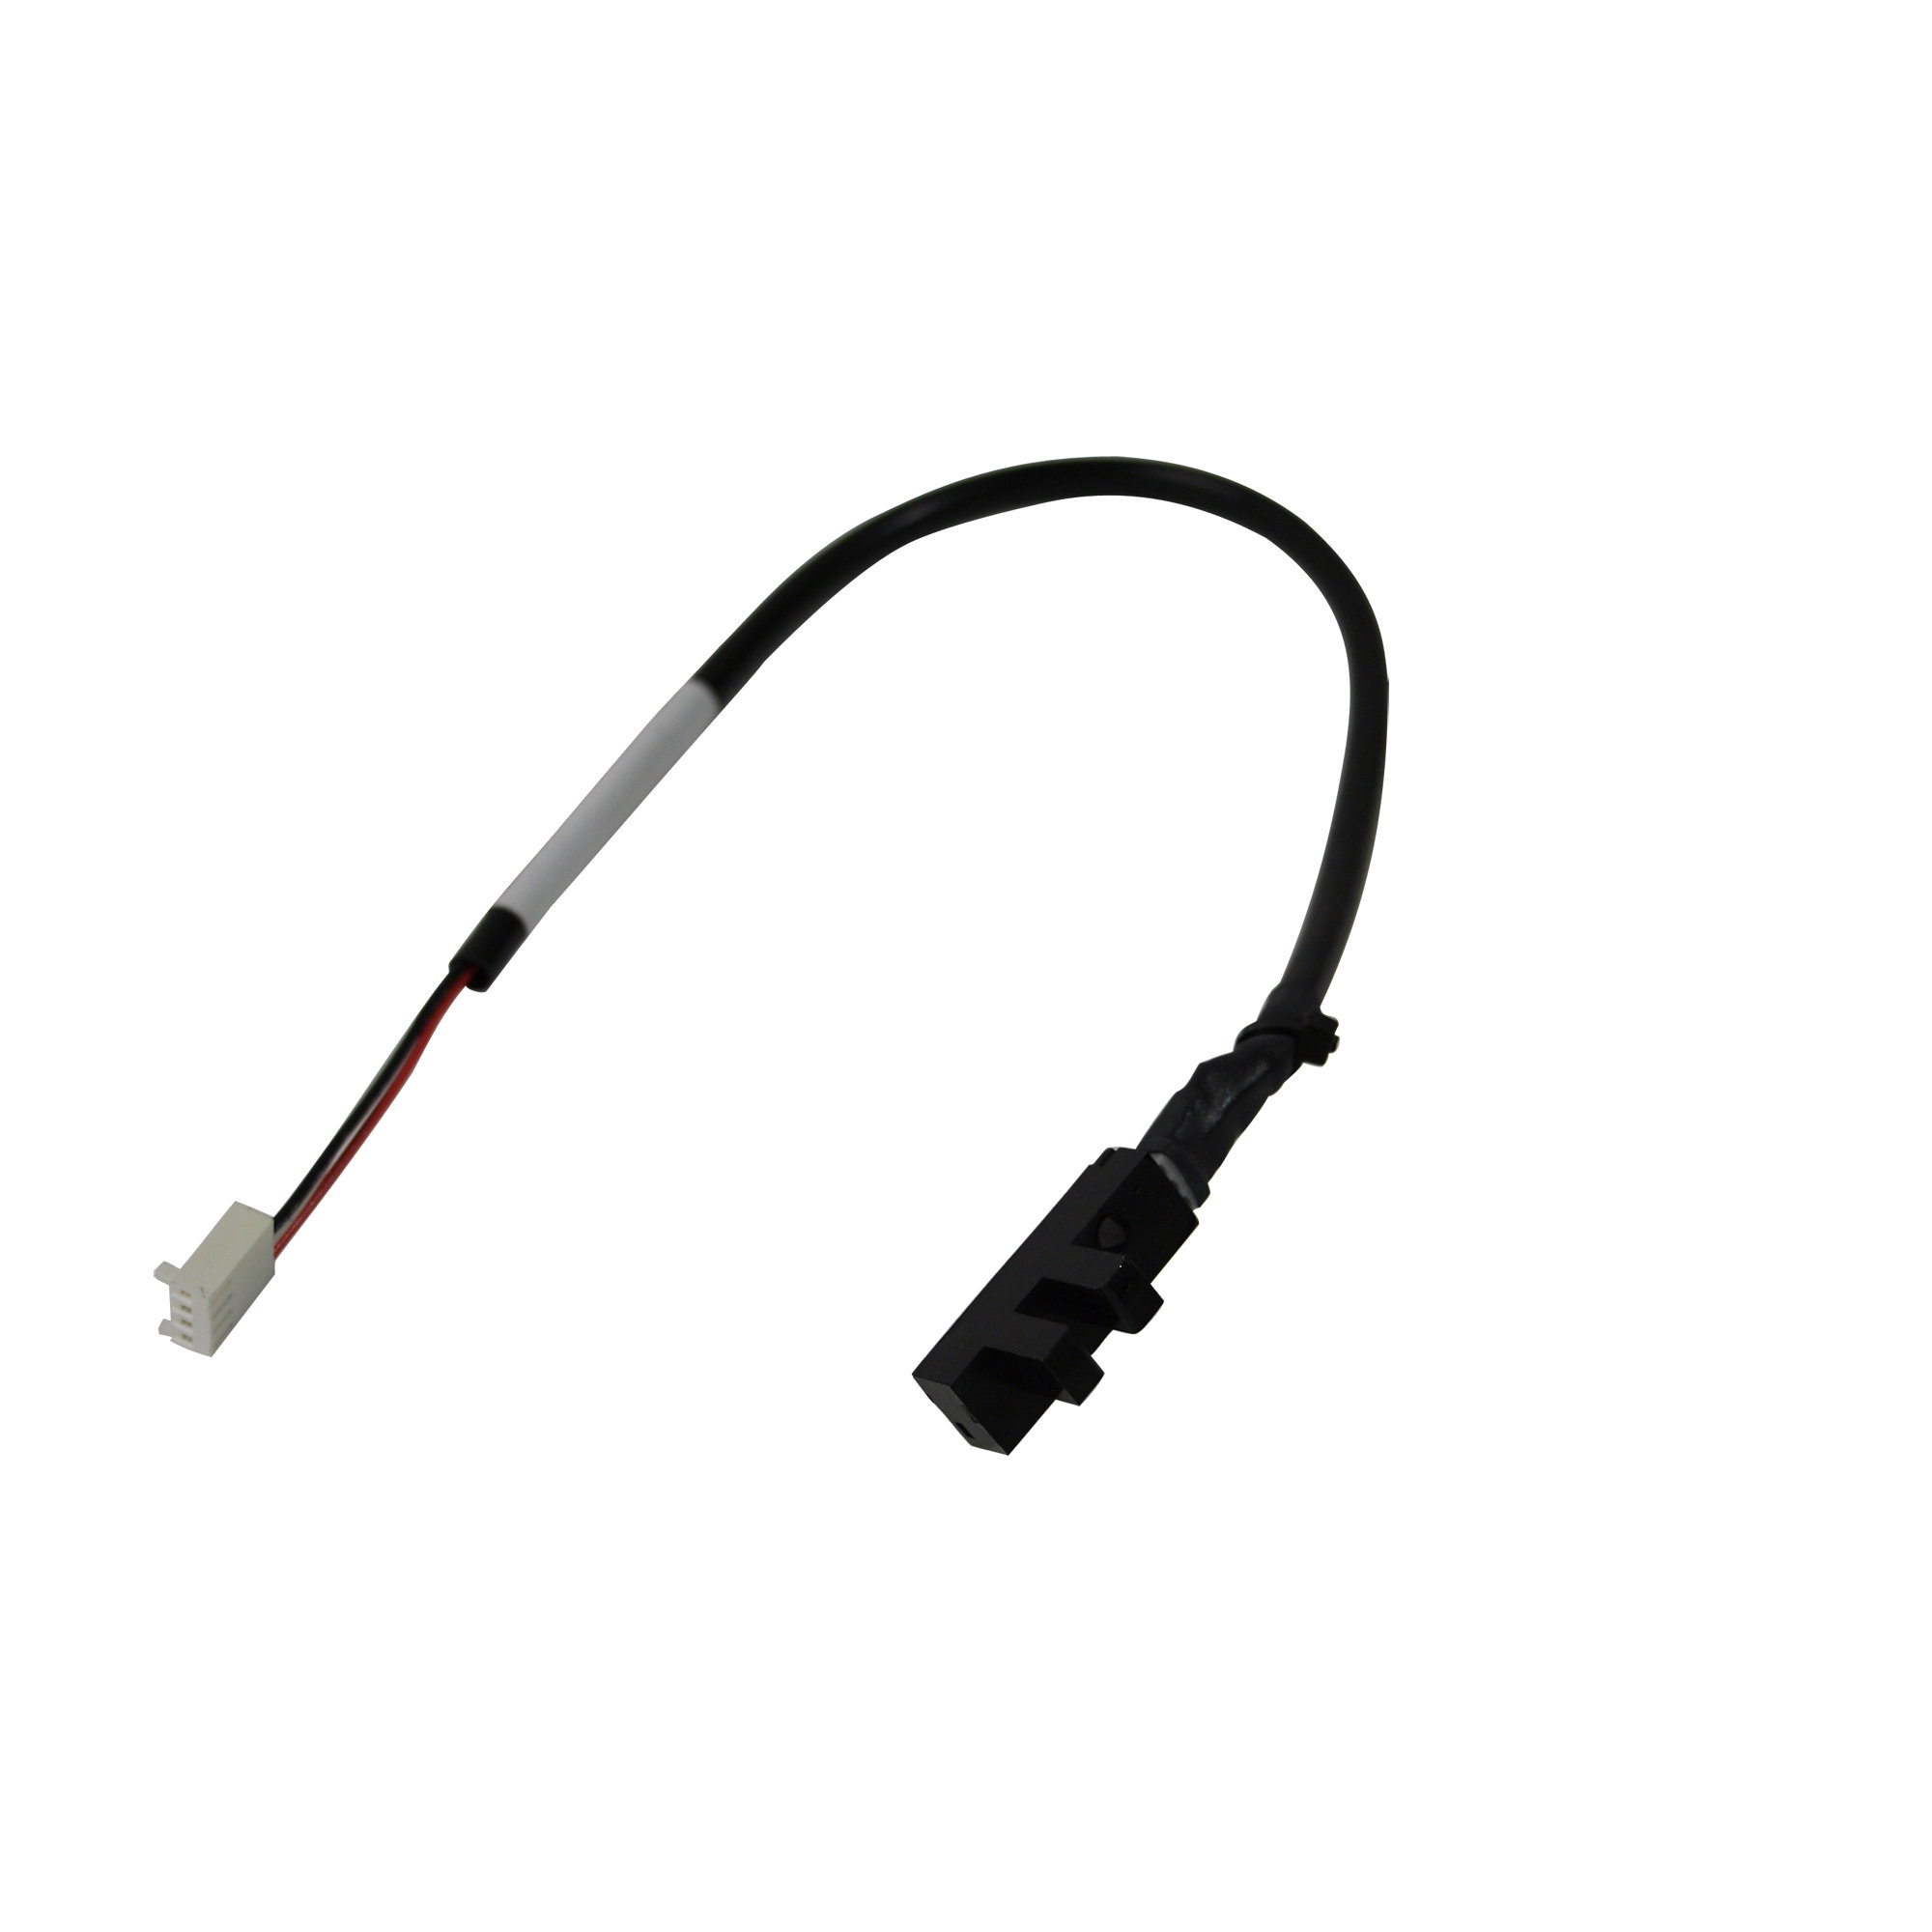 Speed Sensor with Cable for McMillan Motor, Cybex/Trotter